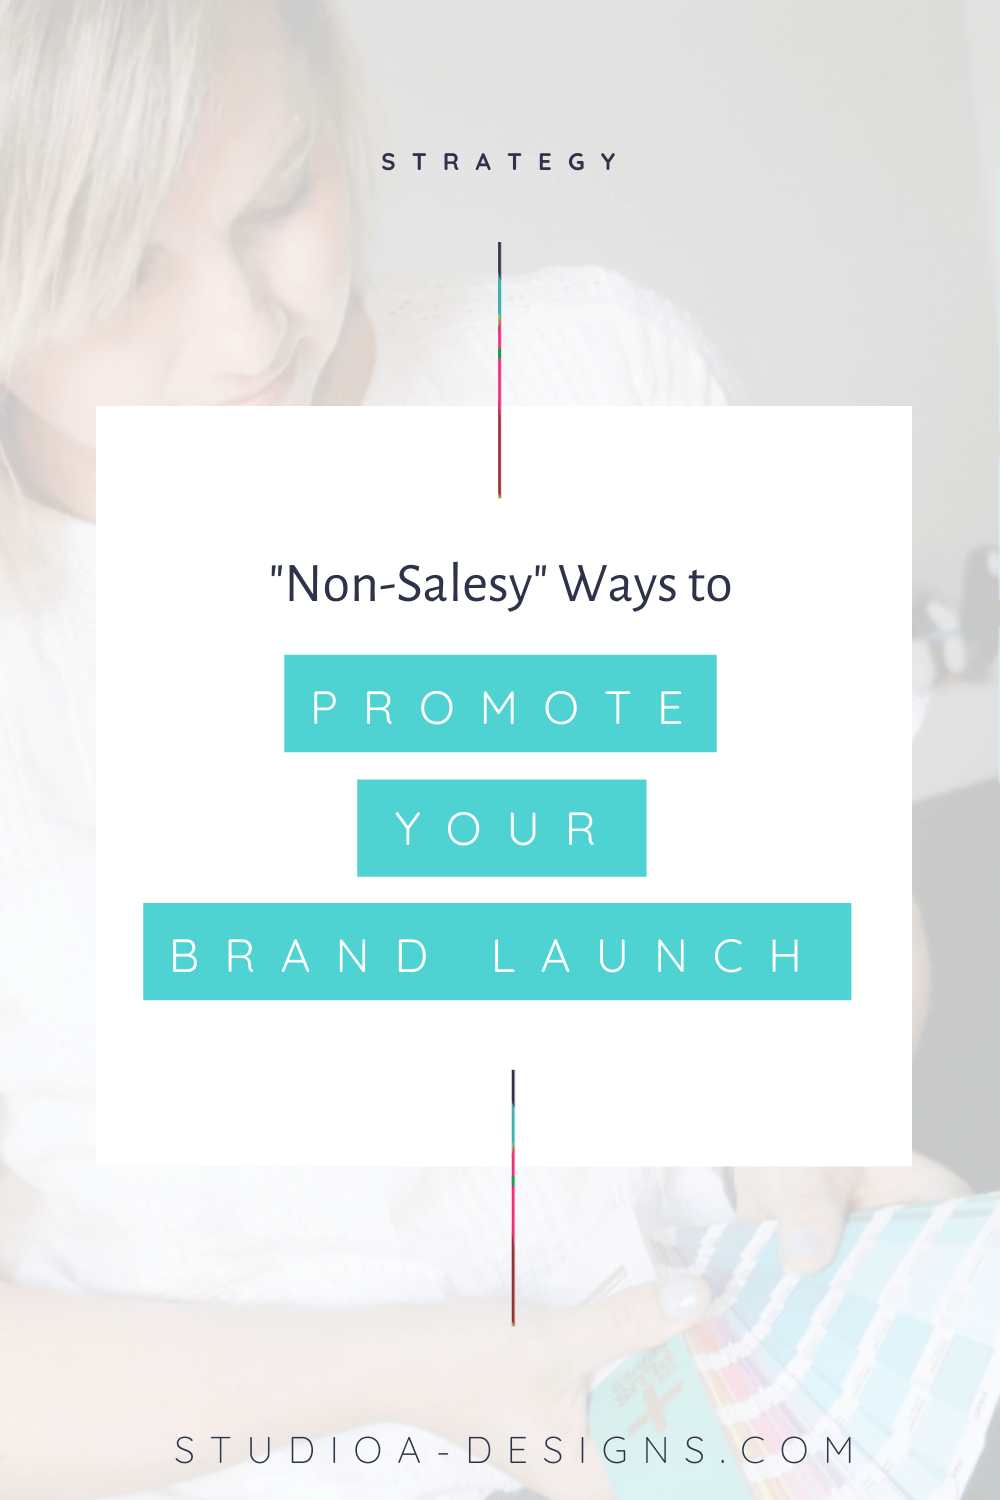 Non-Salesy Ways to Promote Your Brand Launch